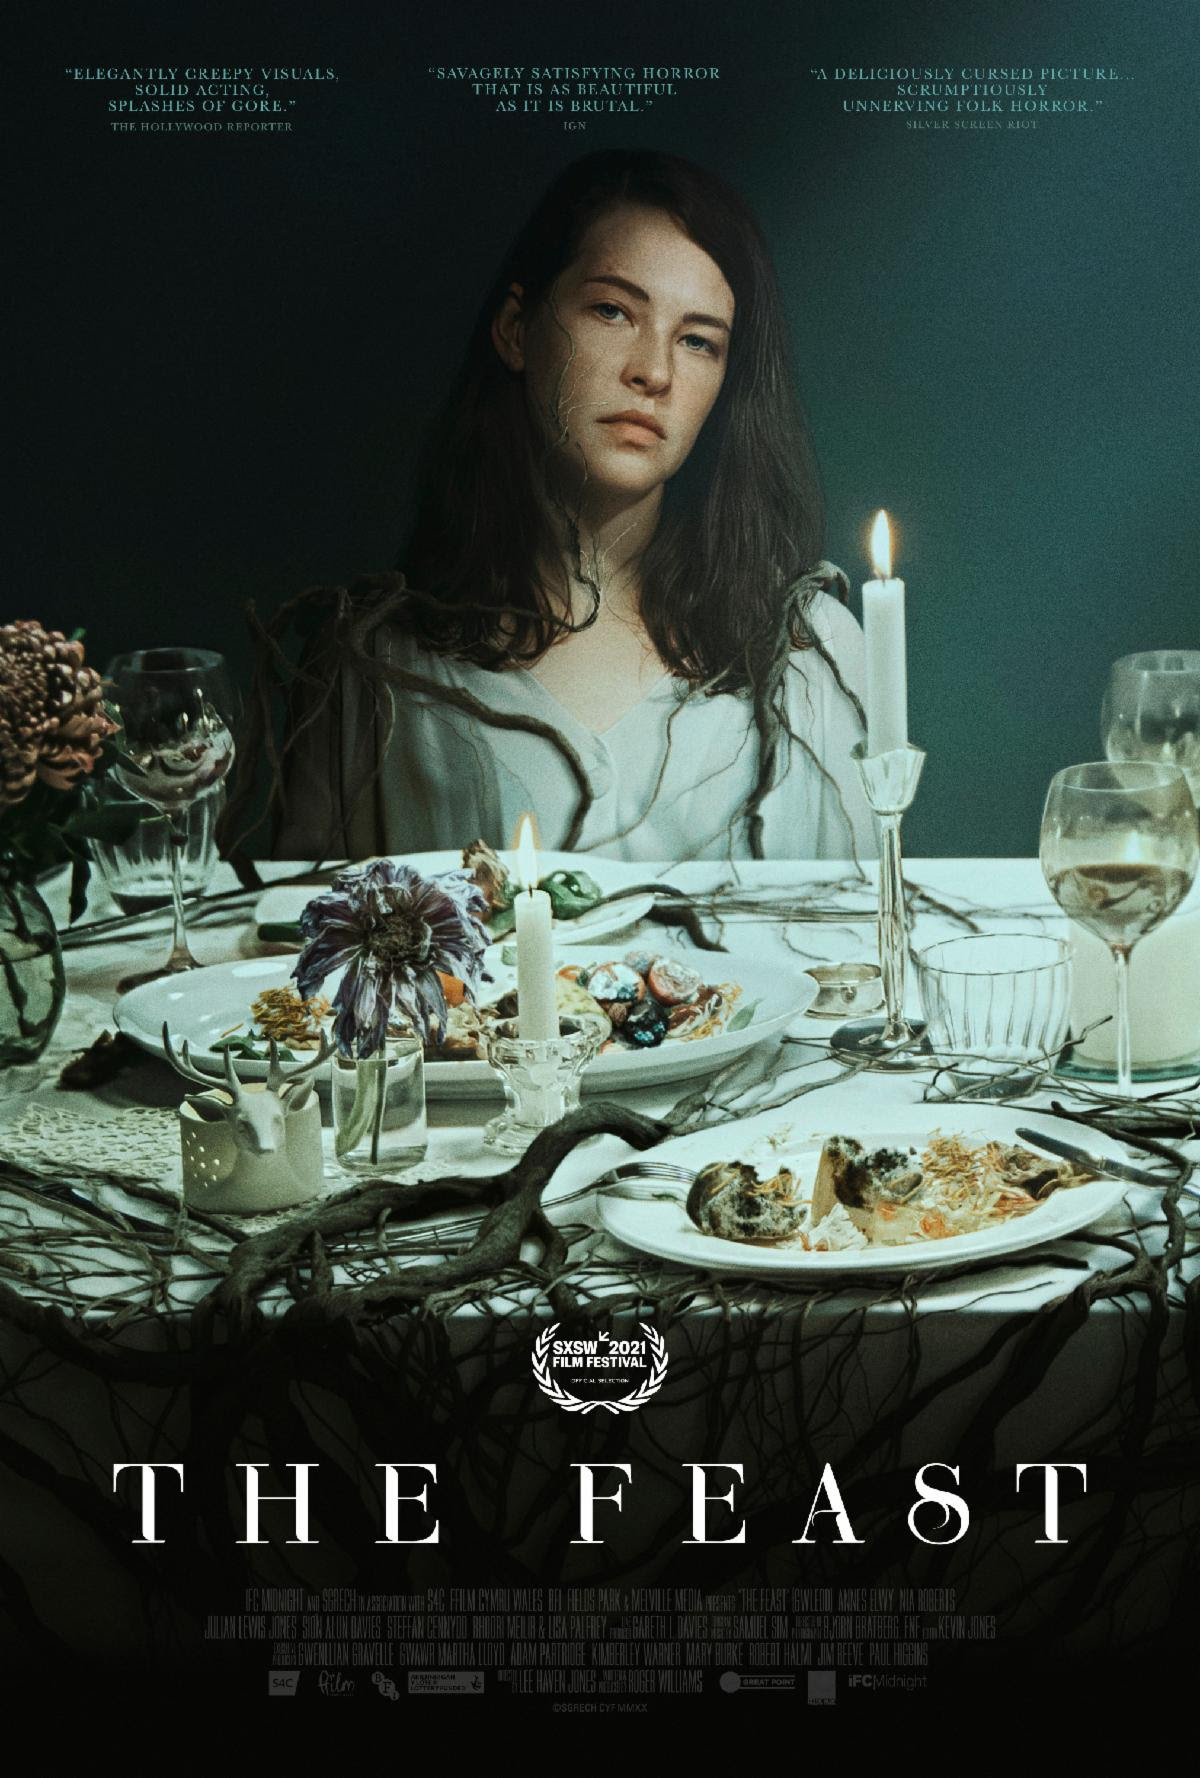 THE FEAST: Official Poster And Trailer, Coming November 19th